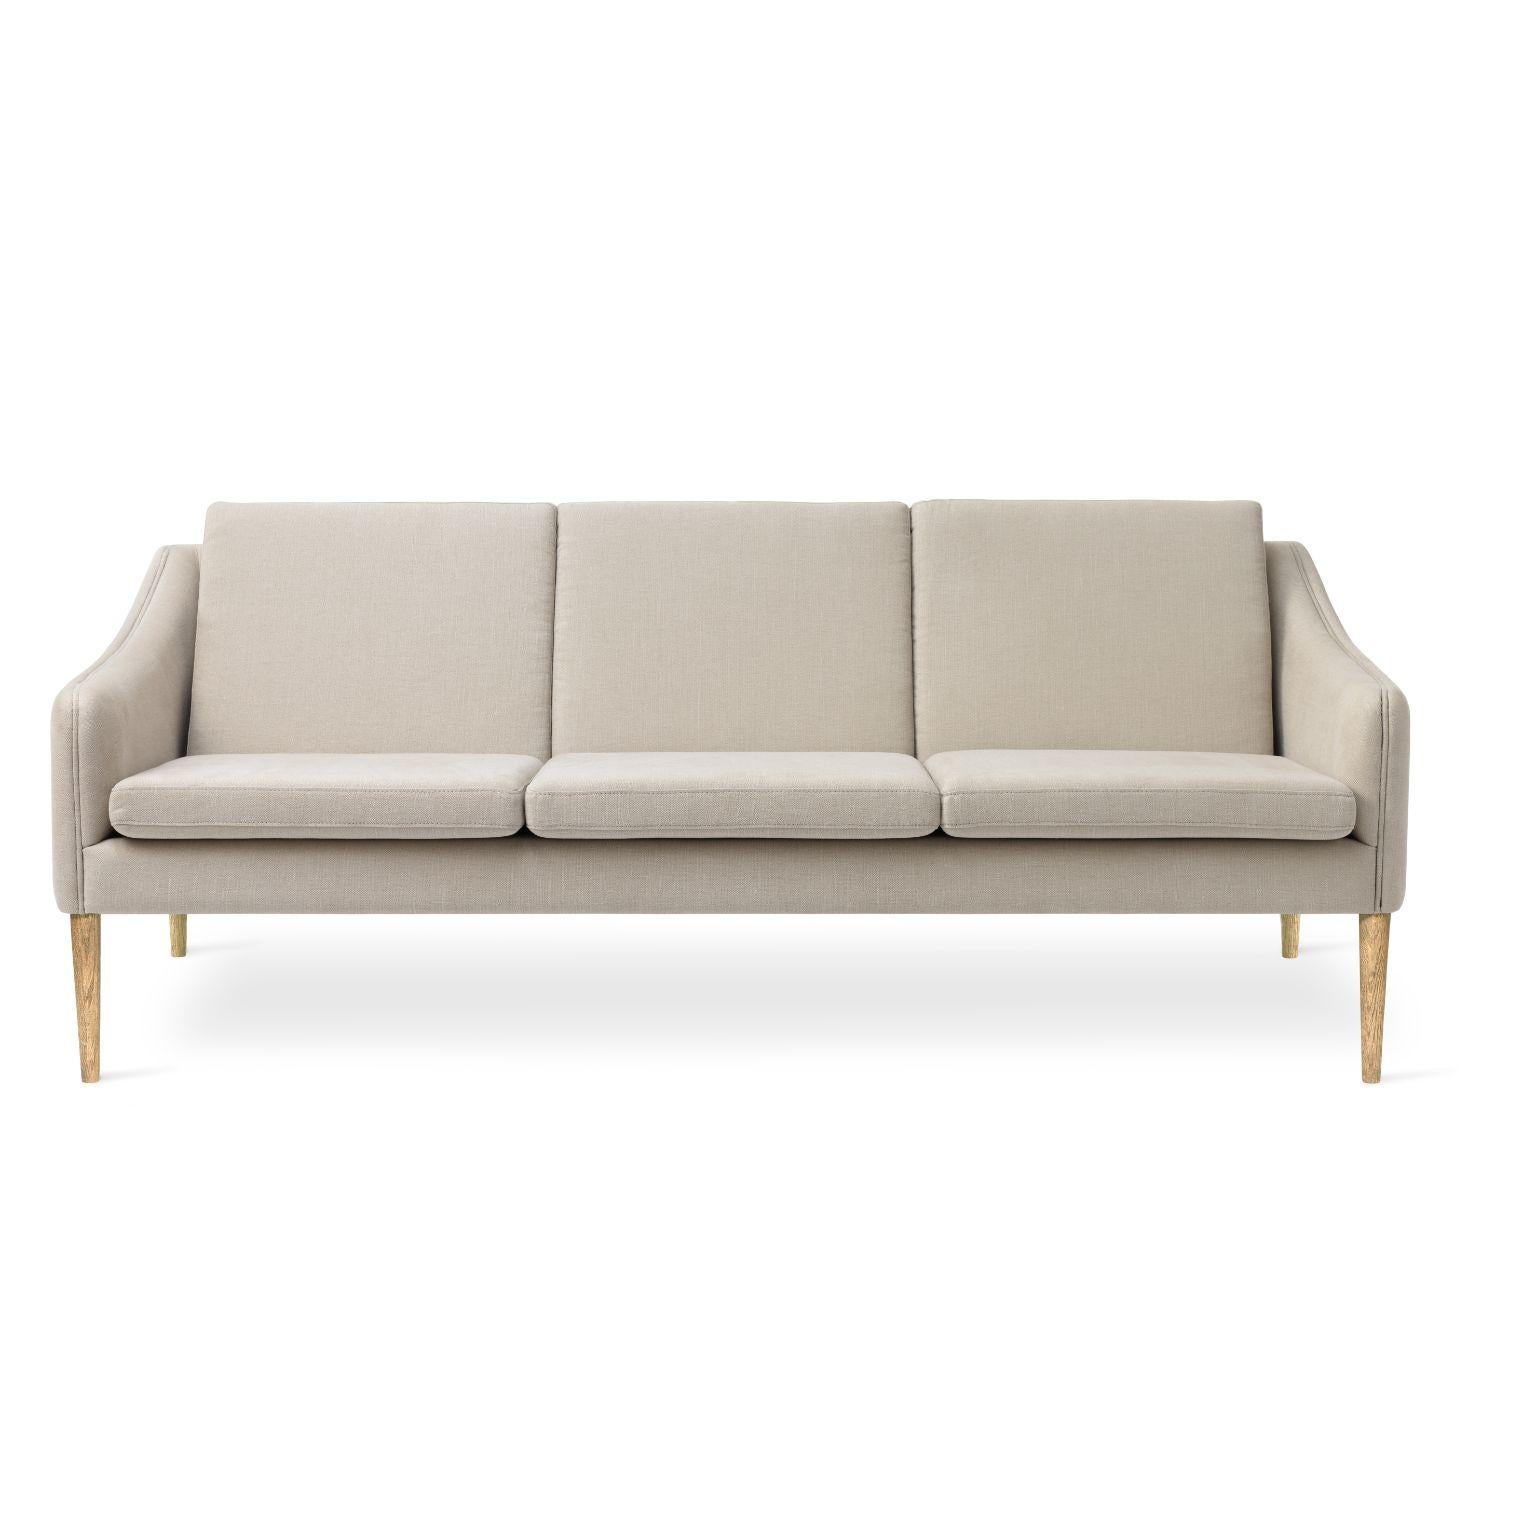 Mr Olsen 3 seater oak linen by Warm Nordic
Dimensions: D 201 x W 79 x H 78/46 cm
Material: Textile upholstery, Foam, Spring system, Solid oiled oak legs, Solid smoked oak legs
Weight: 50 kg
Also available in different colours and finishes.

A